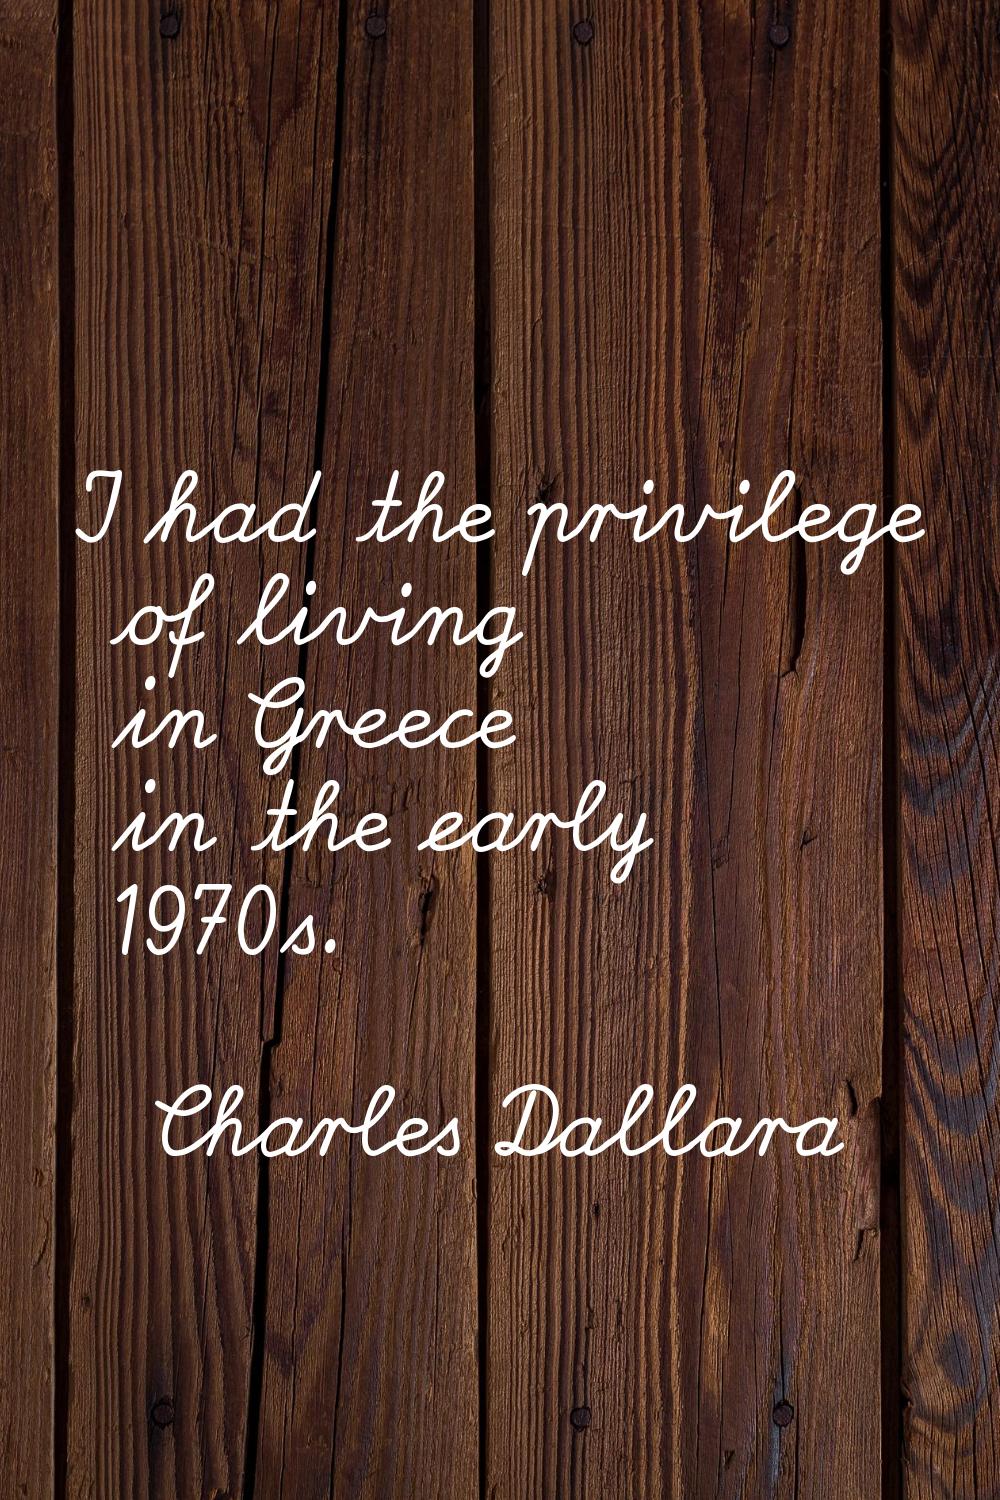 I had the privilege of living in Greece in the early 1970s.